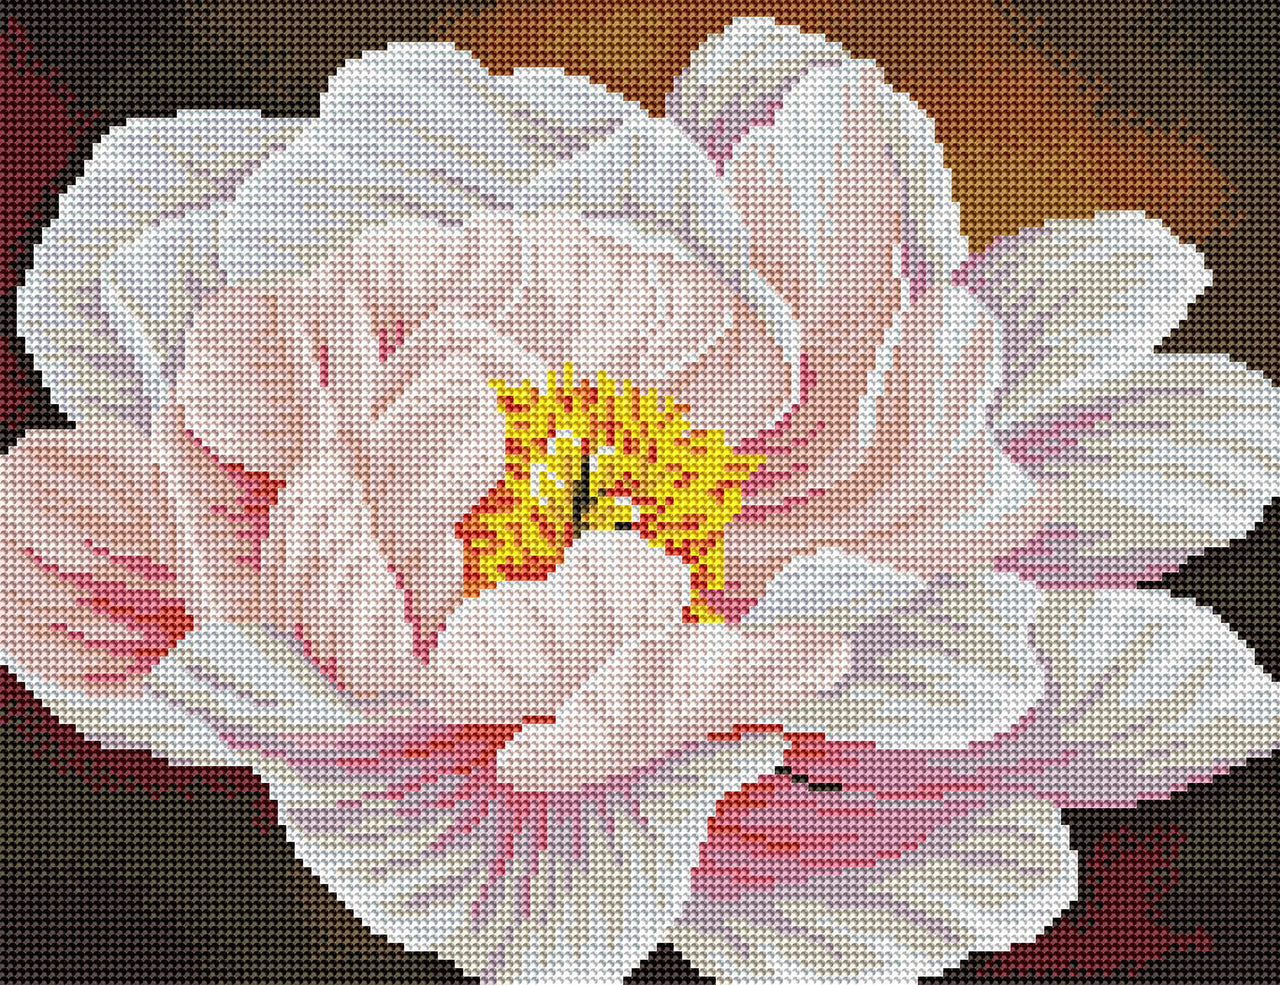 Diamond Painting Peony Etude 17" x 13" (42.6cm x 32.8cm) / Round with 27 Colors including 3 ABs / 17,784